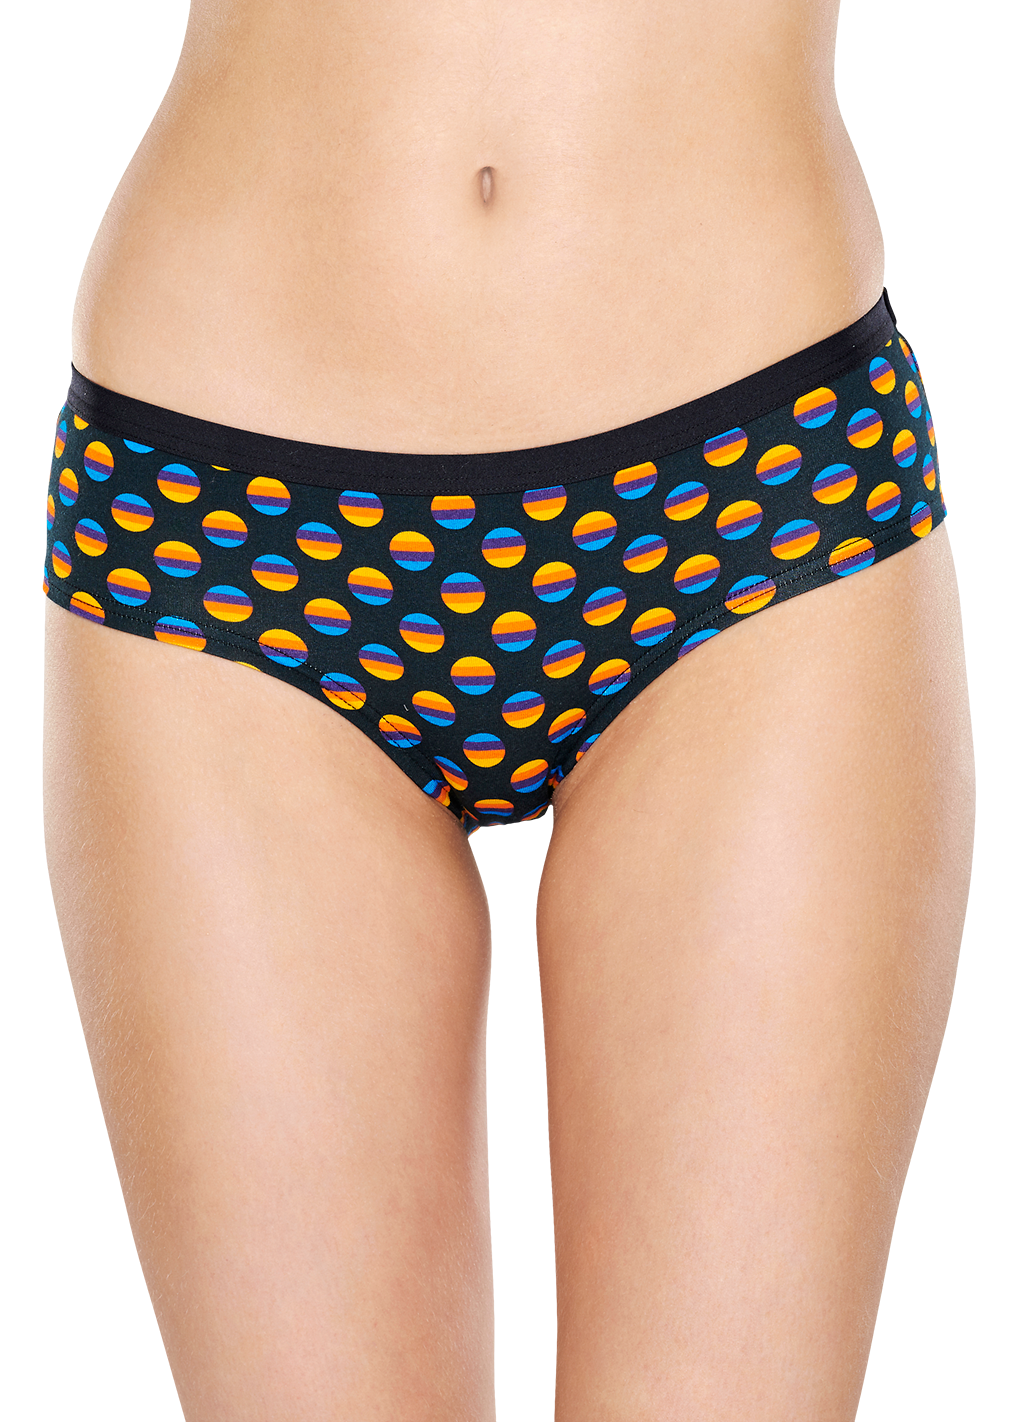 AMhomely Sexy Panties for Women Clearance- Women's Funny Leopard